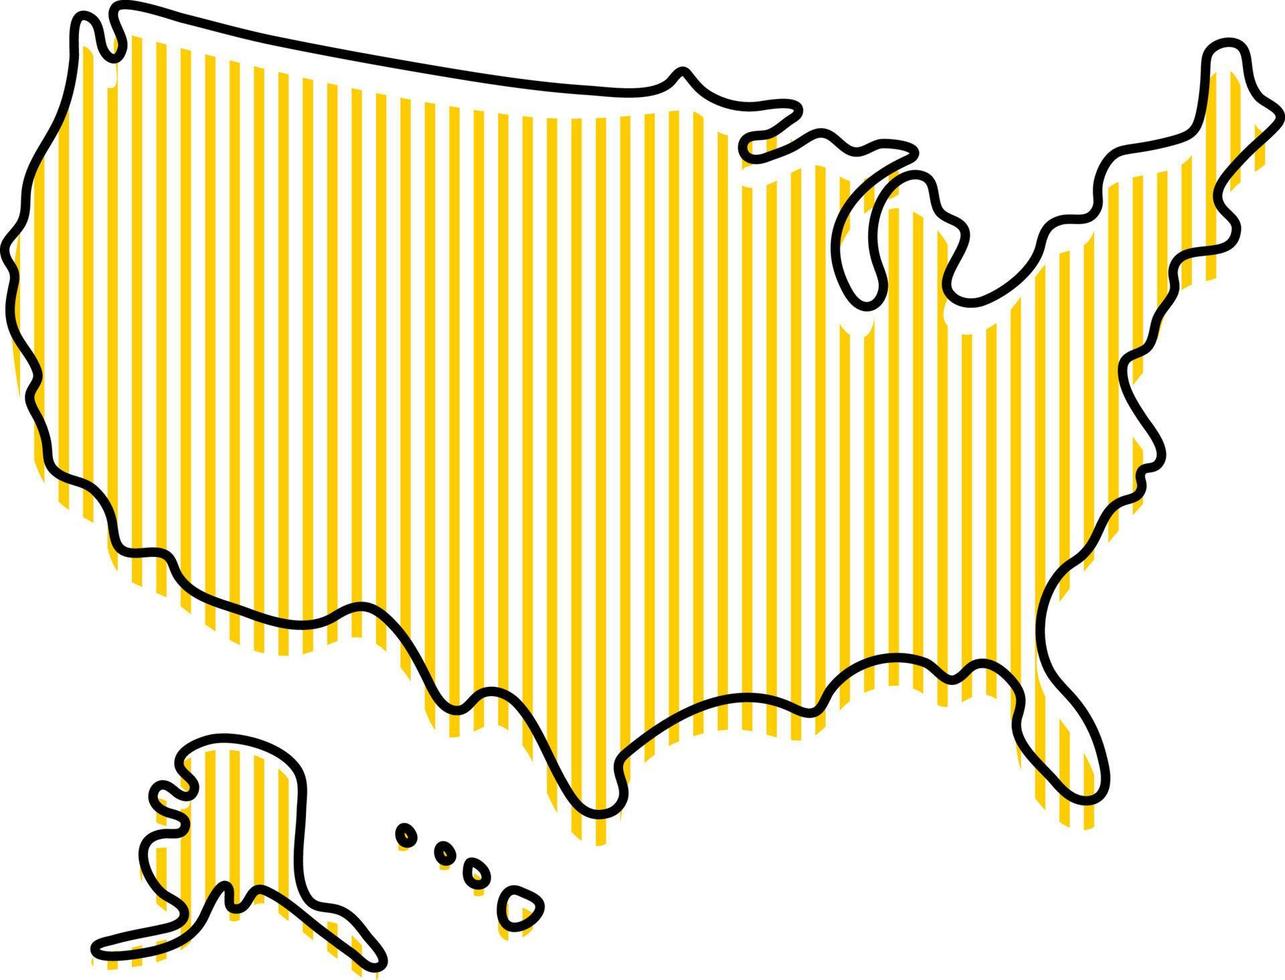 Stylized simple outline map of USA icon. vector